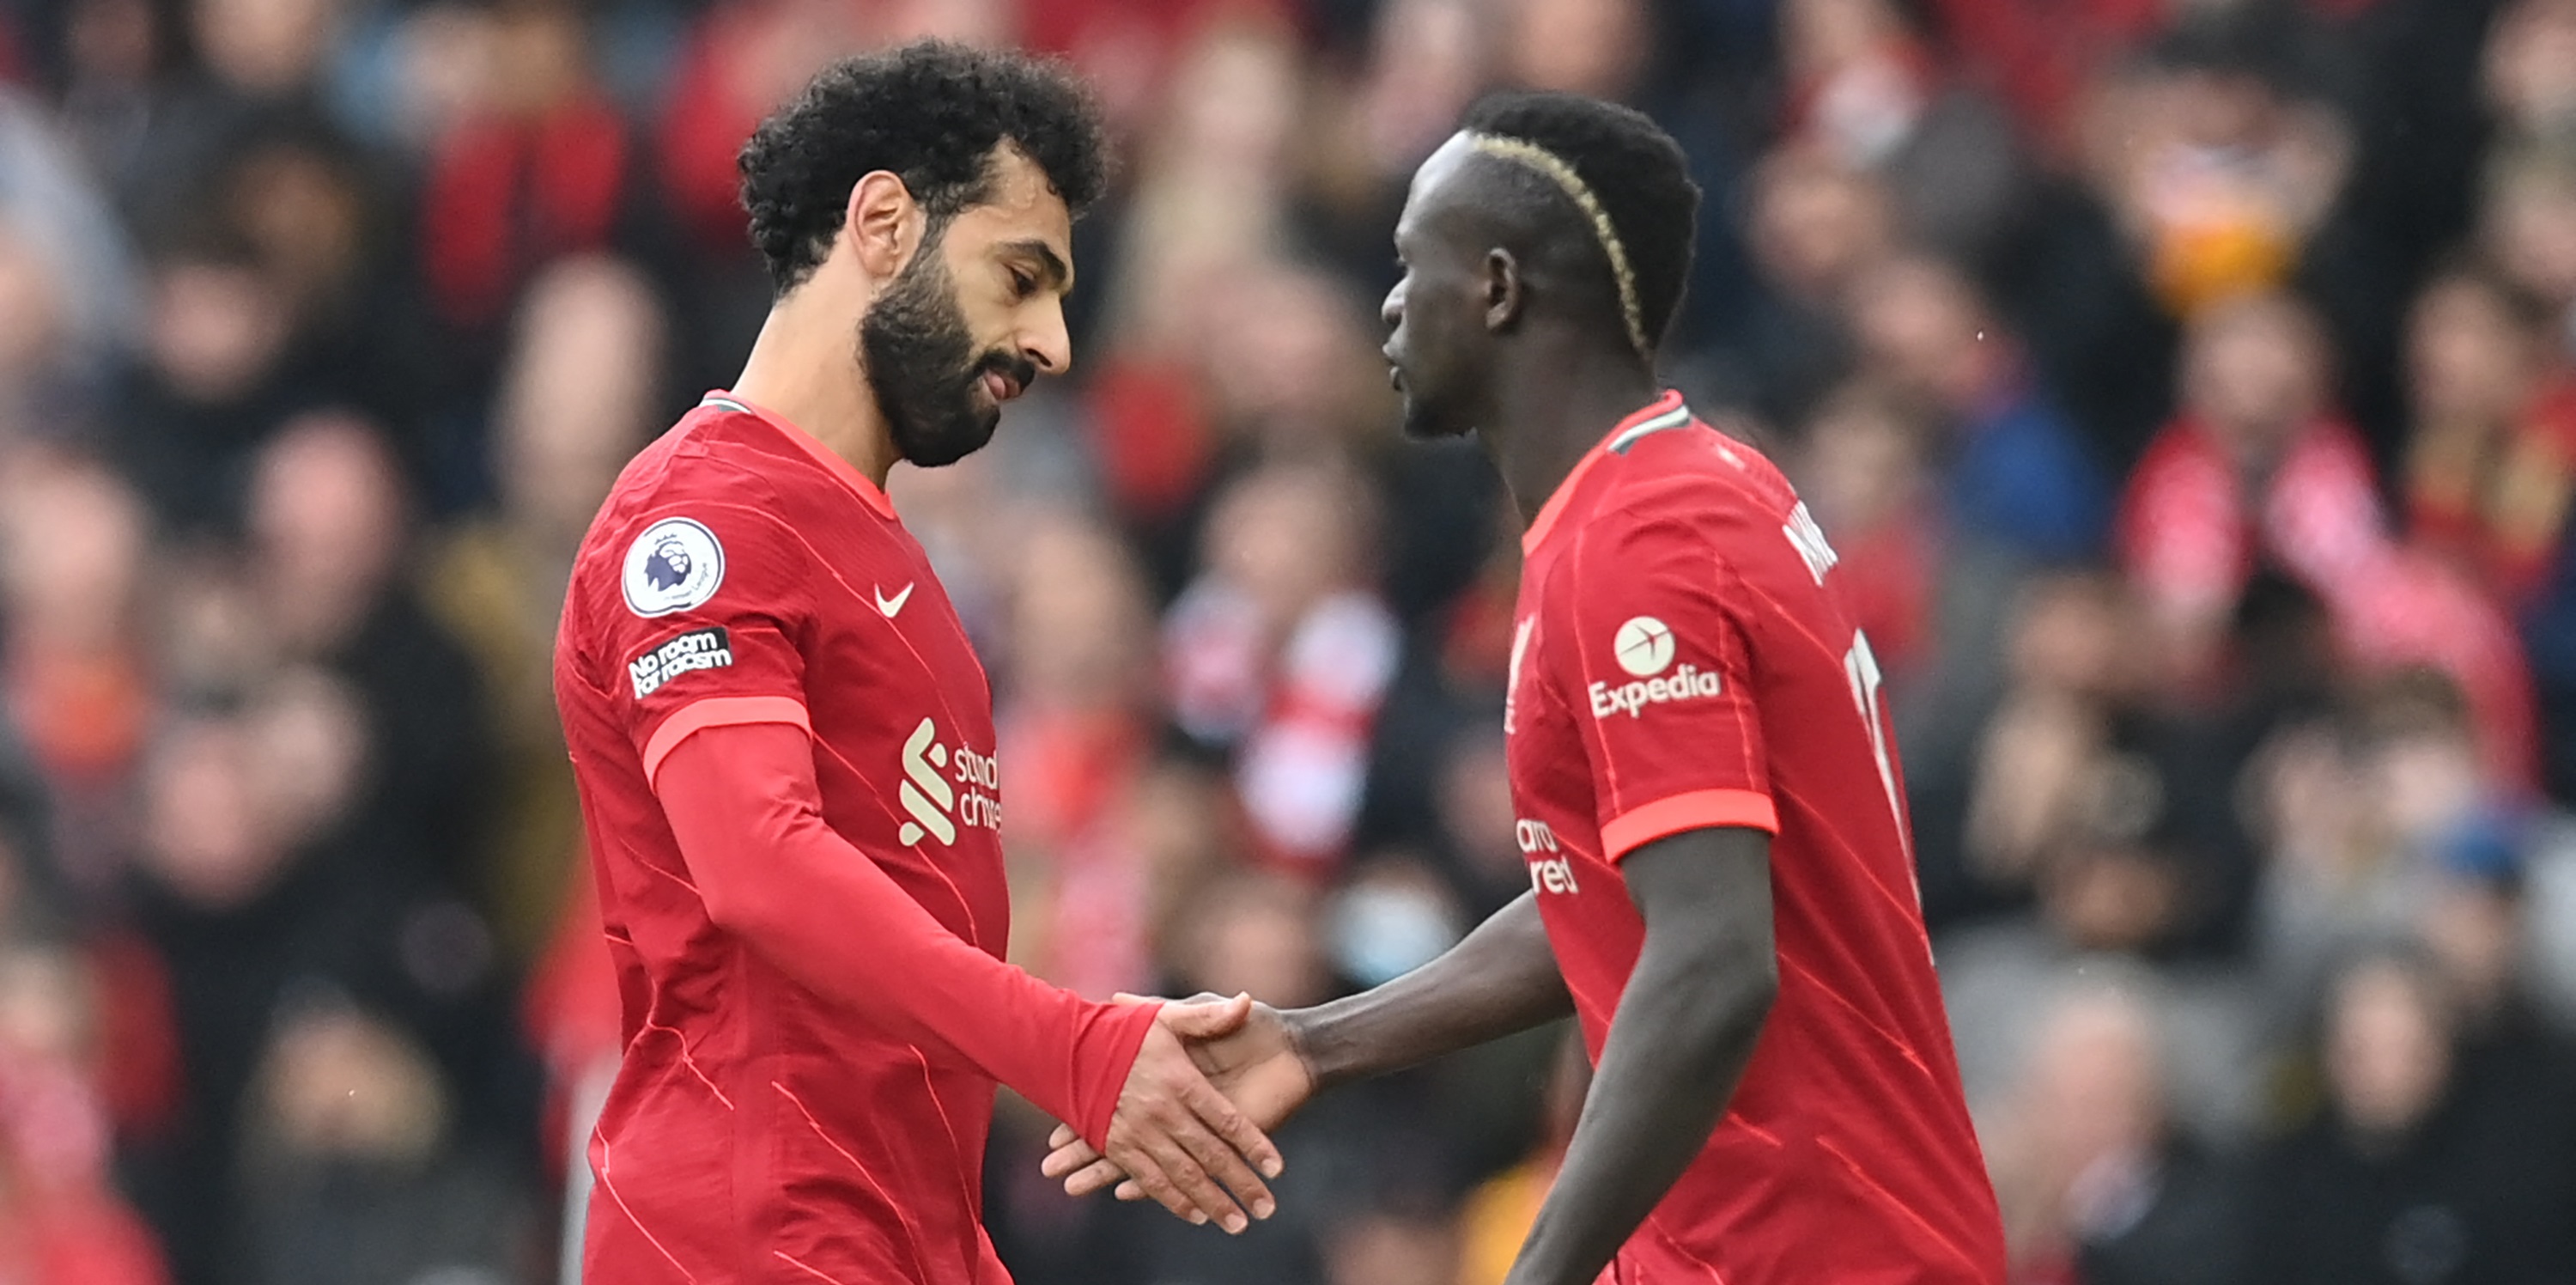 George Weah insists Sadio Mane and Mo Salah ‘shouldn’t obsess over the Ballon d’Or’ and urges the two Liverpool stars to ‘improve more’